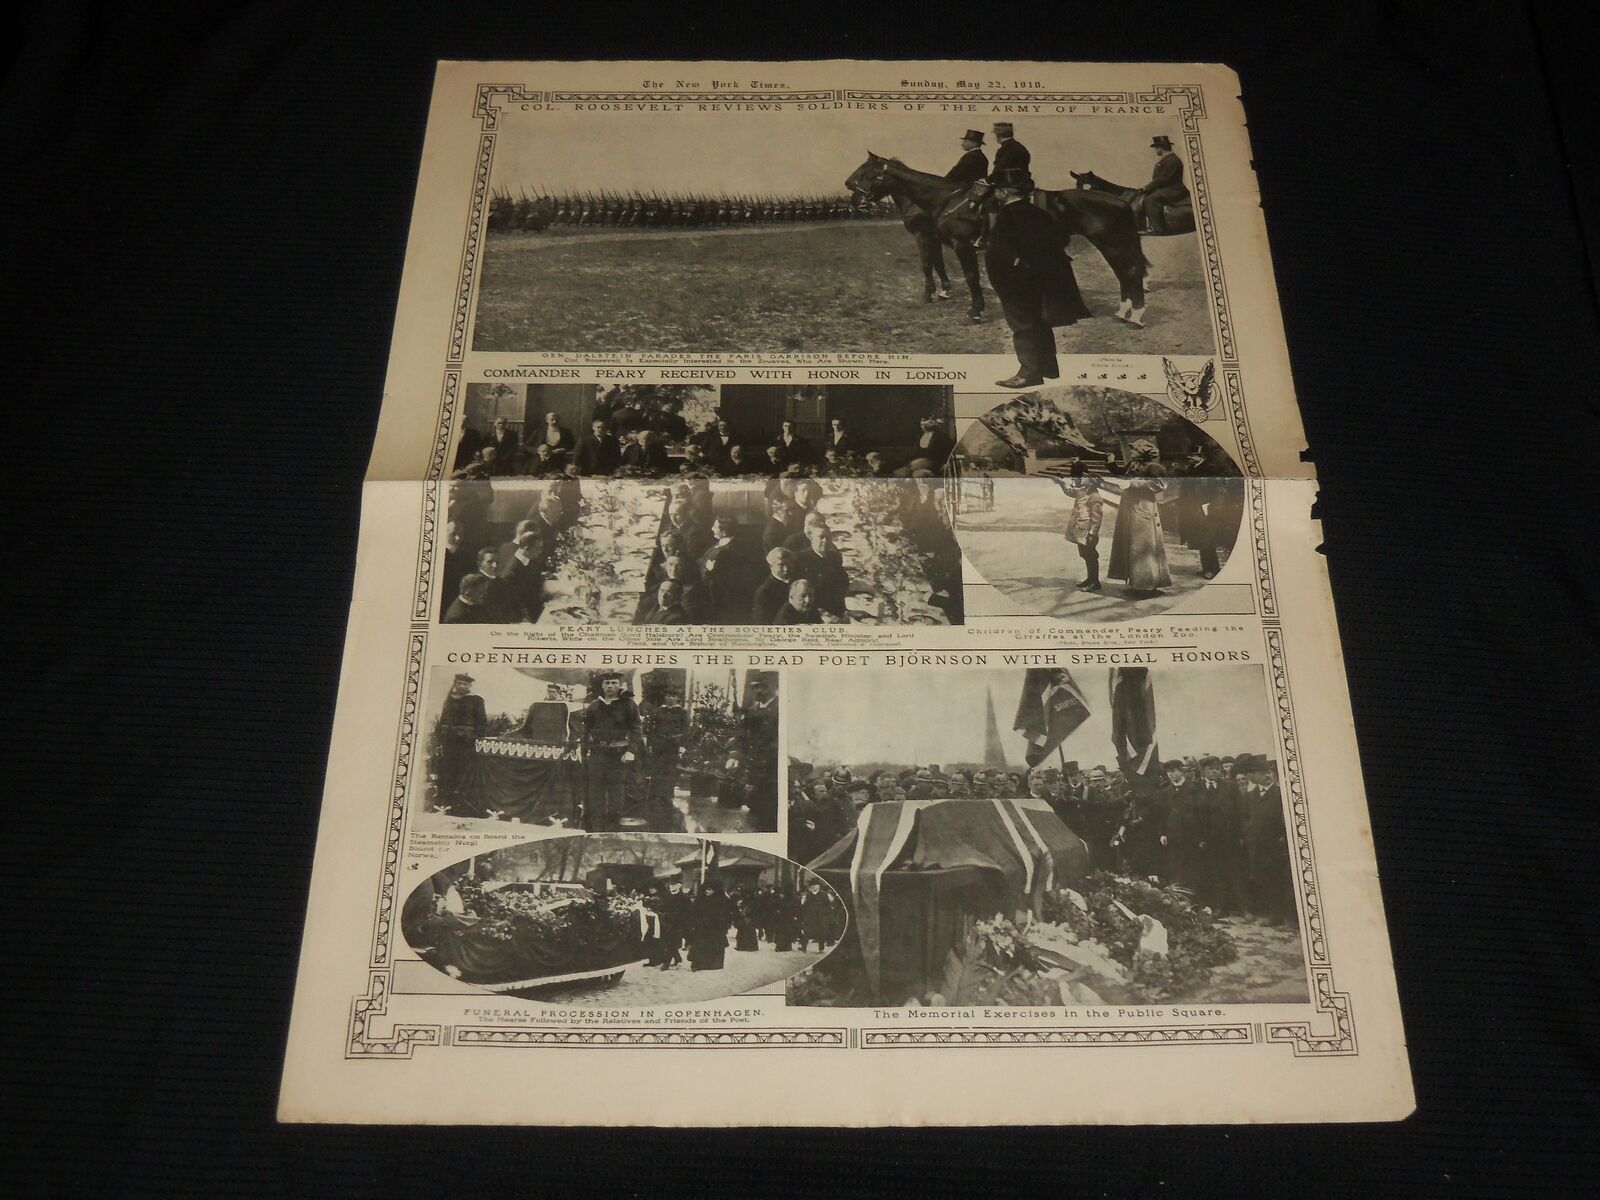 1910 MAY 22 NEW YORK TIMES PICTURE SECTION - KING EDWARD VII IS DEAD - NP 5638